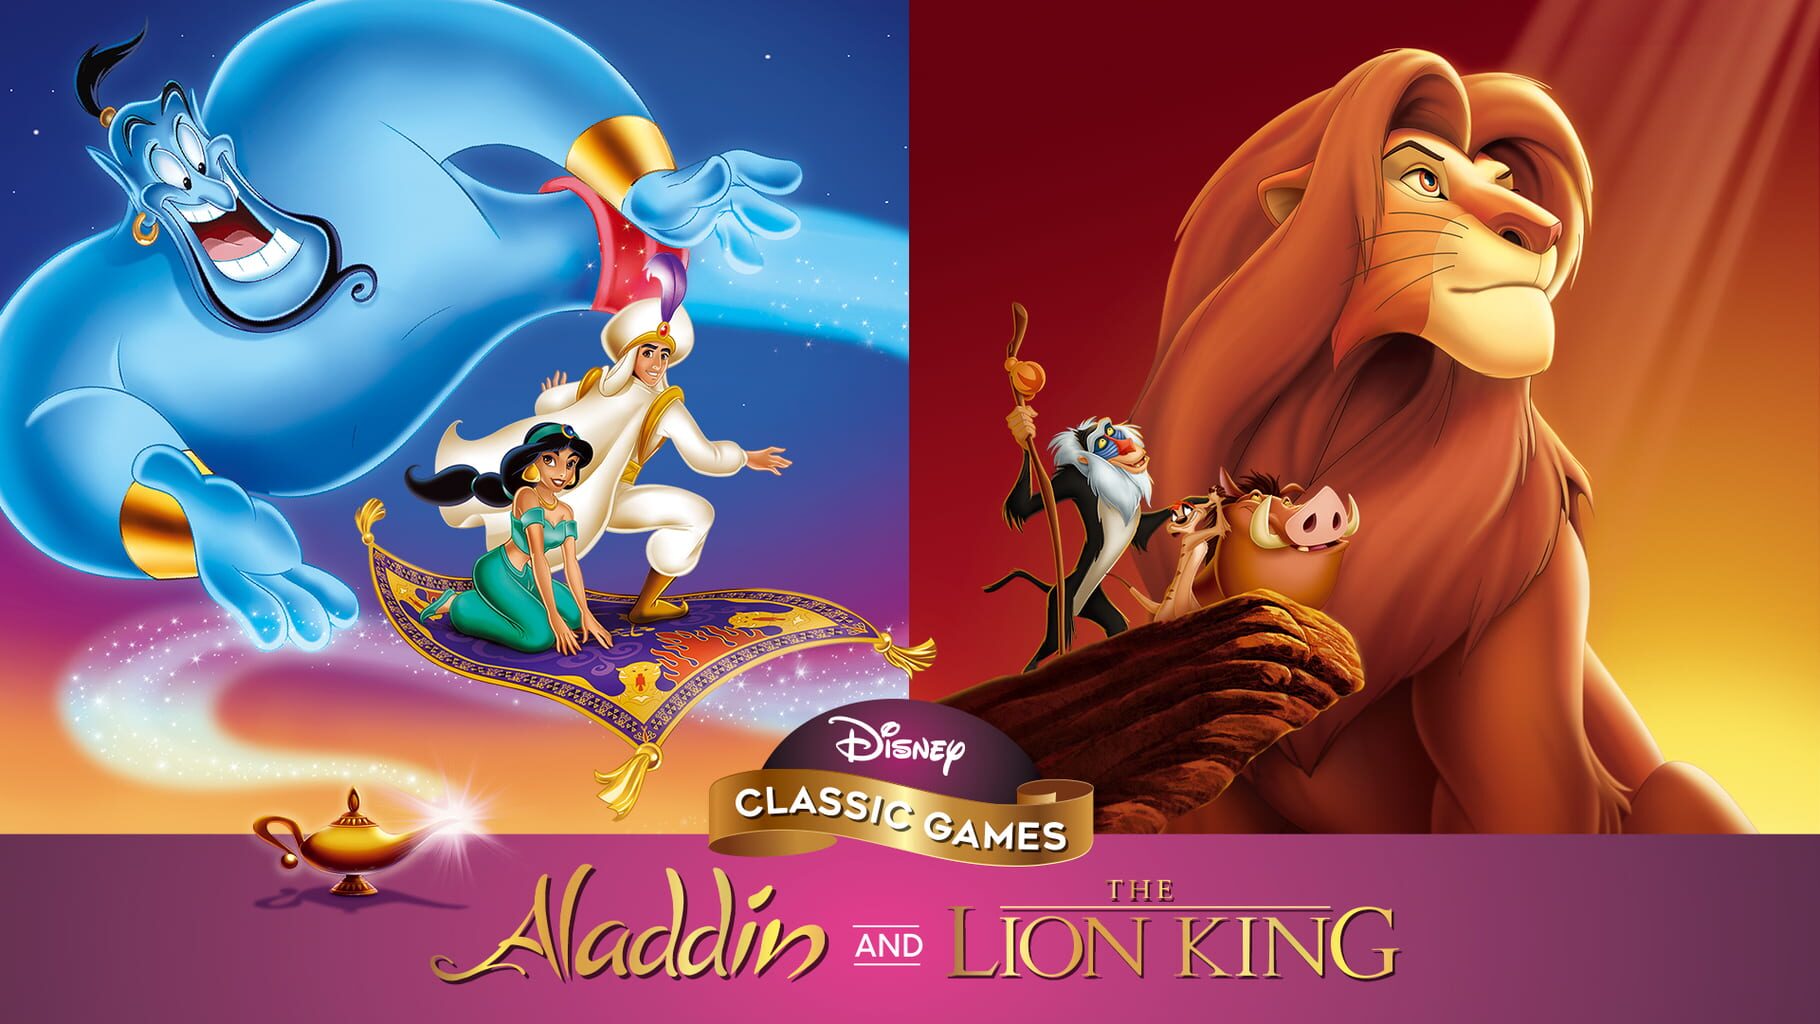 Disney Classic Games: Aladdin and The Lion King artwork